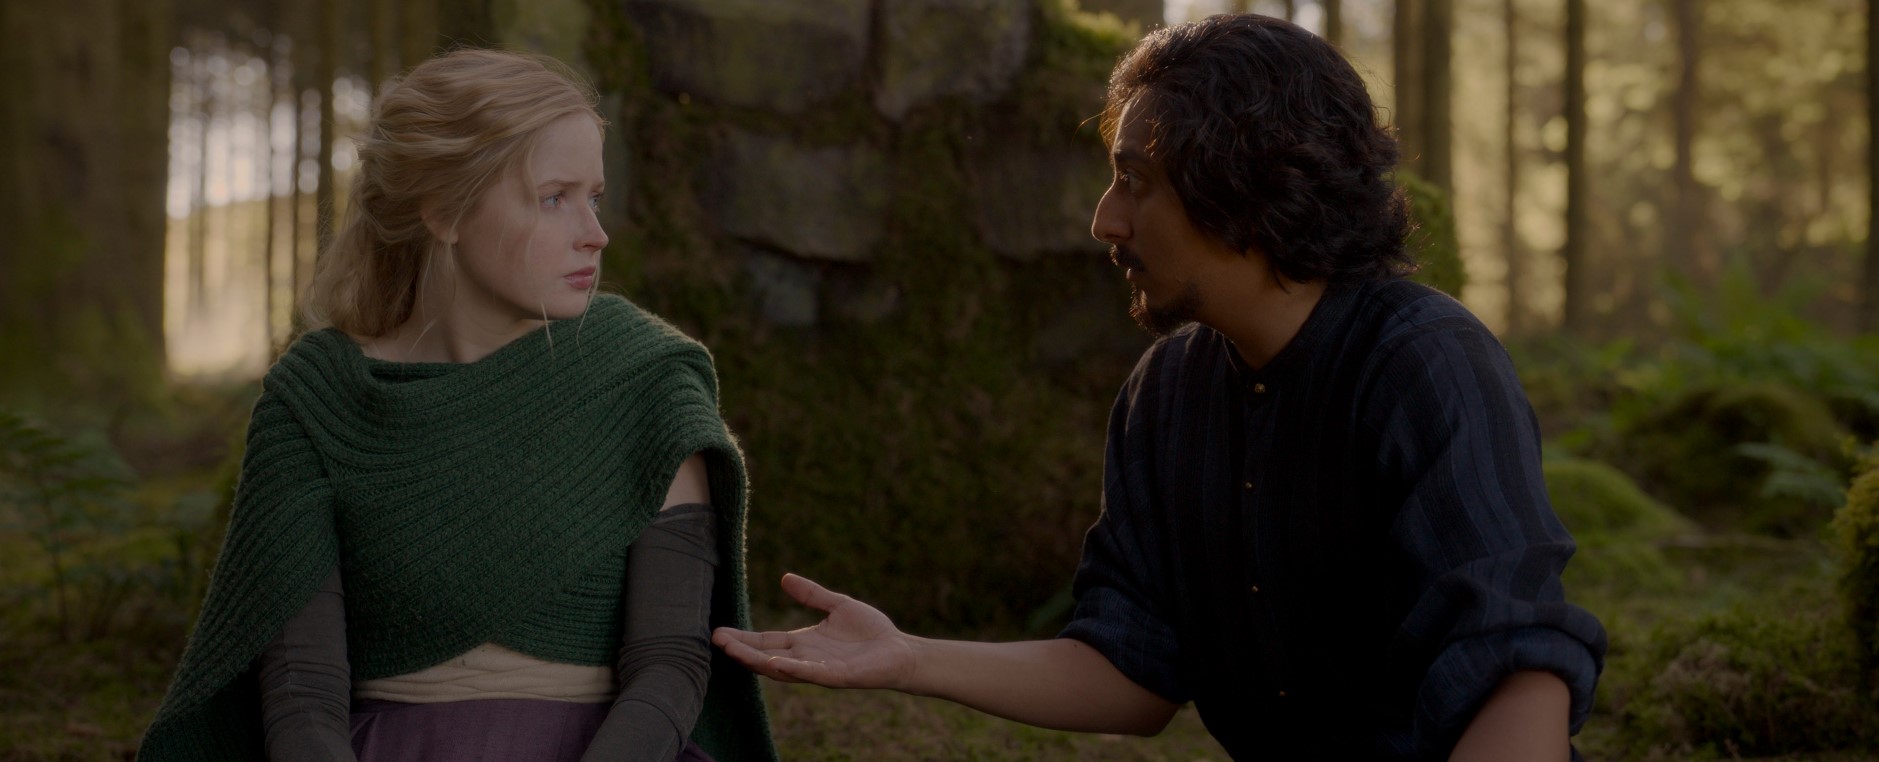 Willow Episode 3 Recap and Ending, Explained: Is Silas Dead?